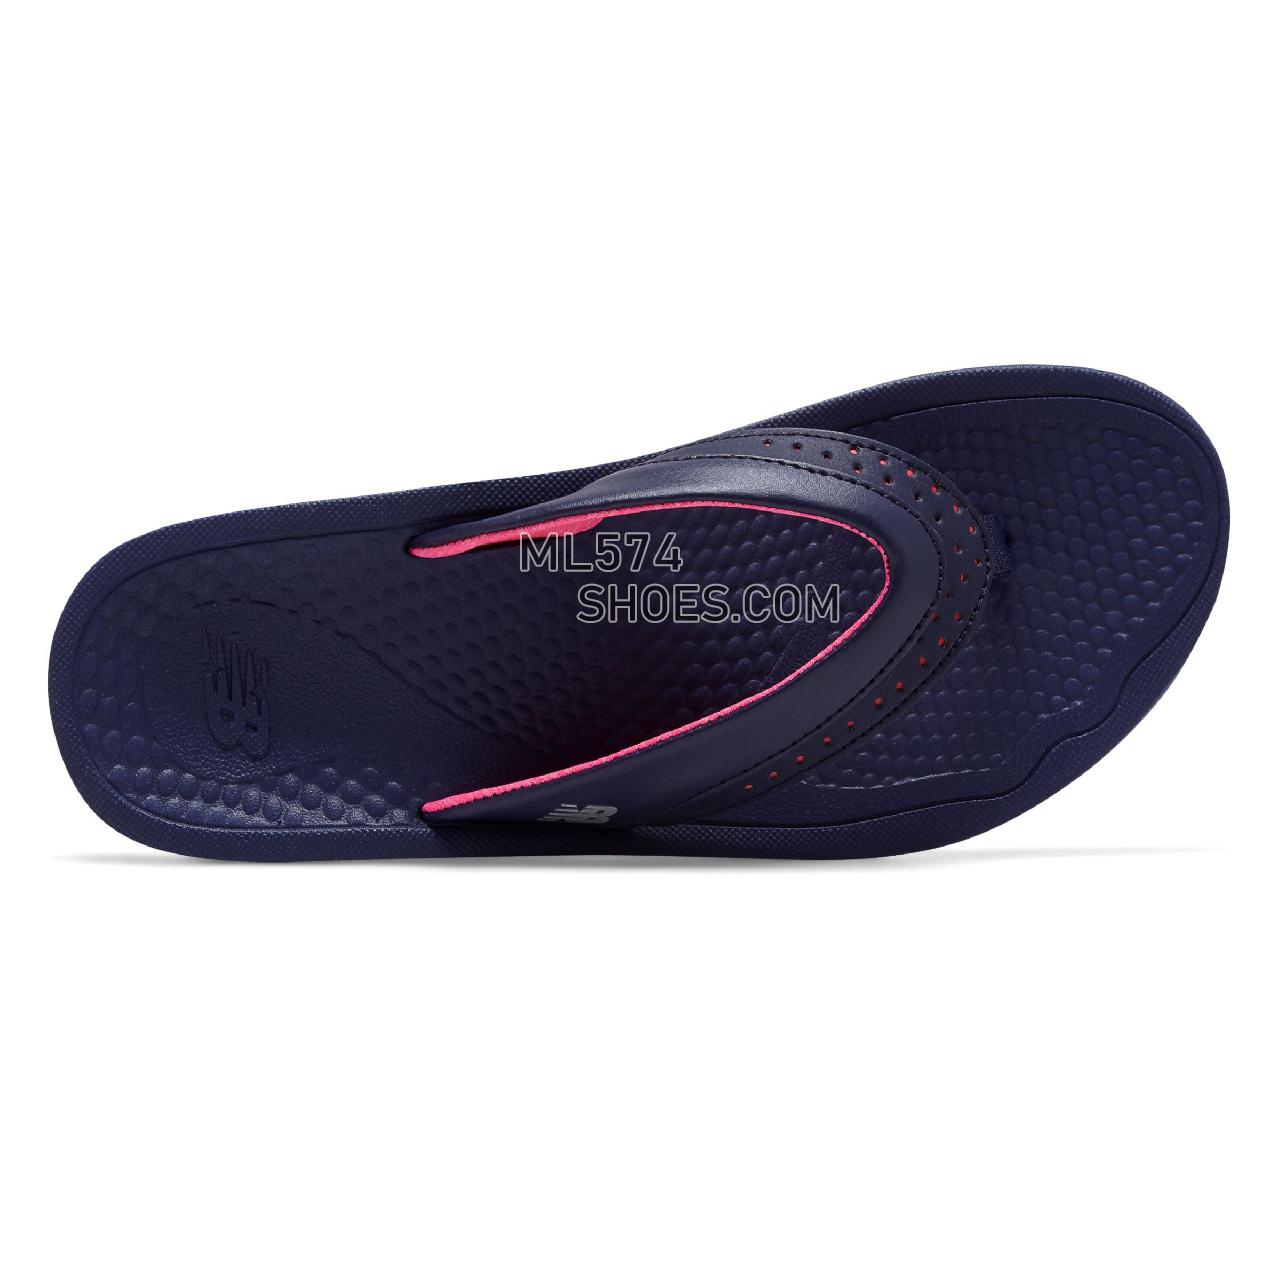 New Balance Renew Thong - Women's 6086 - Sandals Navy with Pink Zing - W6086NVP